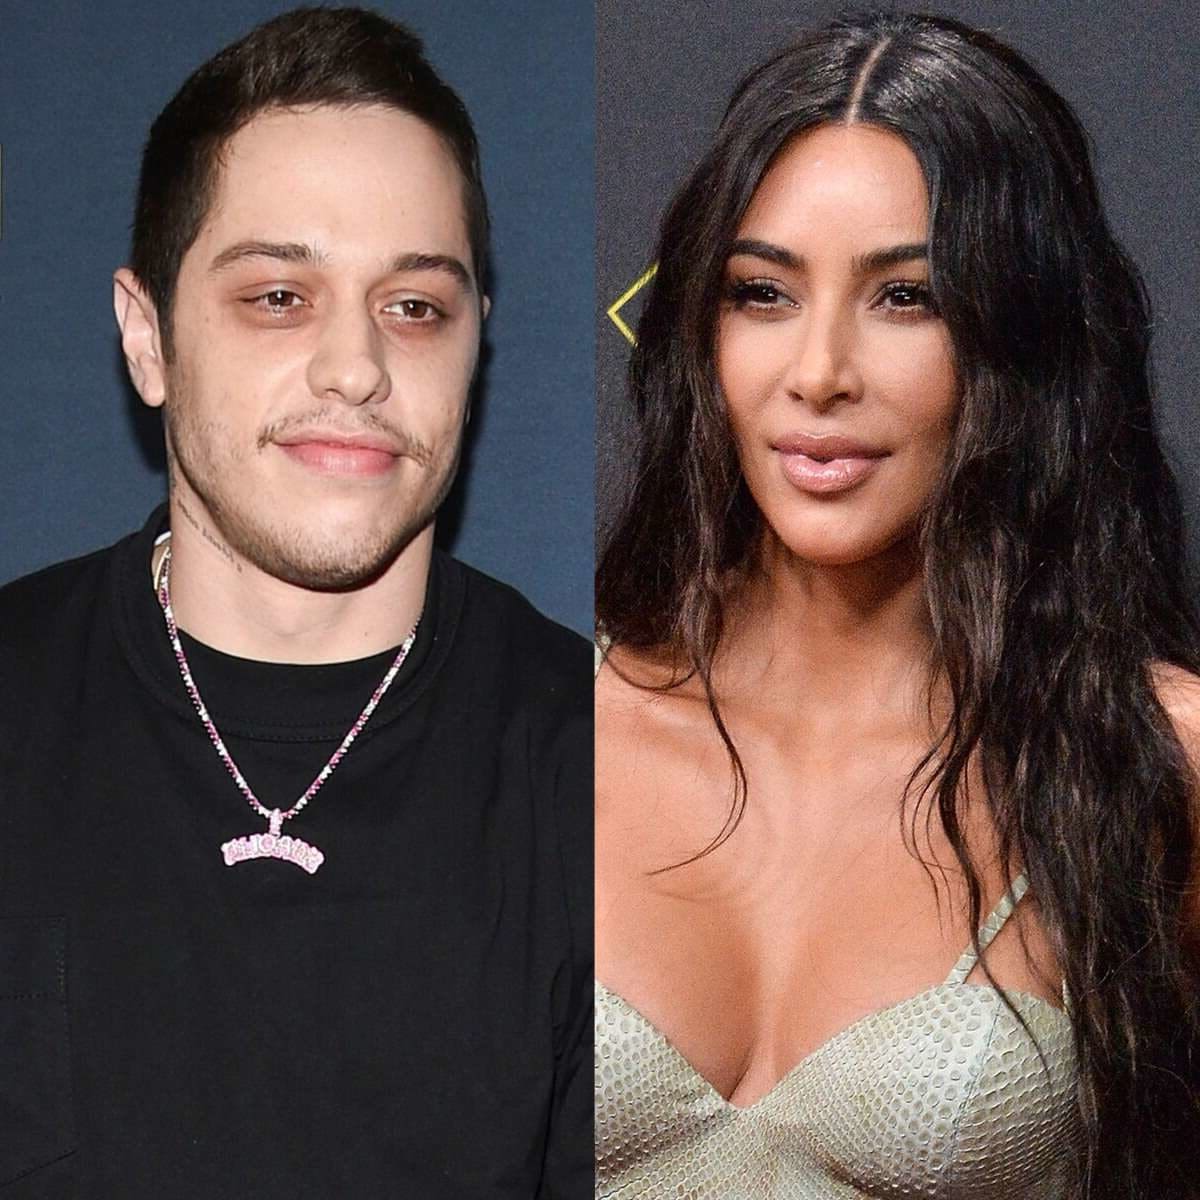 kim-kardashian-and-pete-davidson-dating-they-had-a-private-dinner-check-out-all-the-details-here